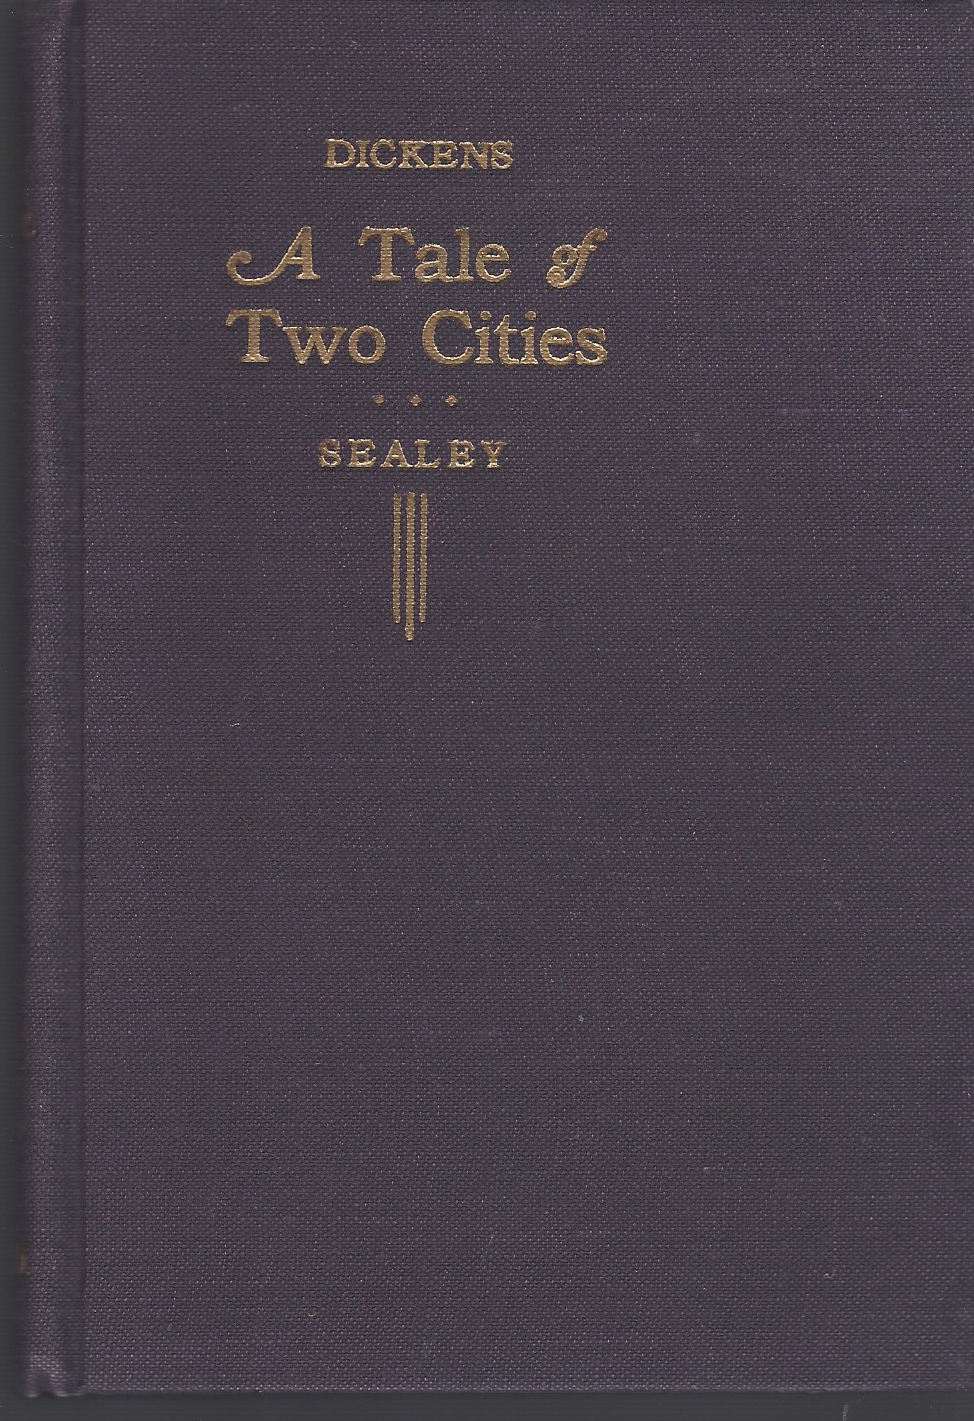 DICKENS CHARLES - A Tale of Two Cities Notes & Questions by Ethel M. Sealey